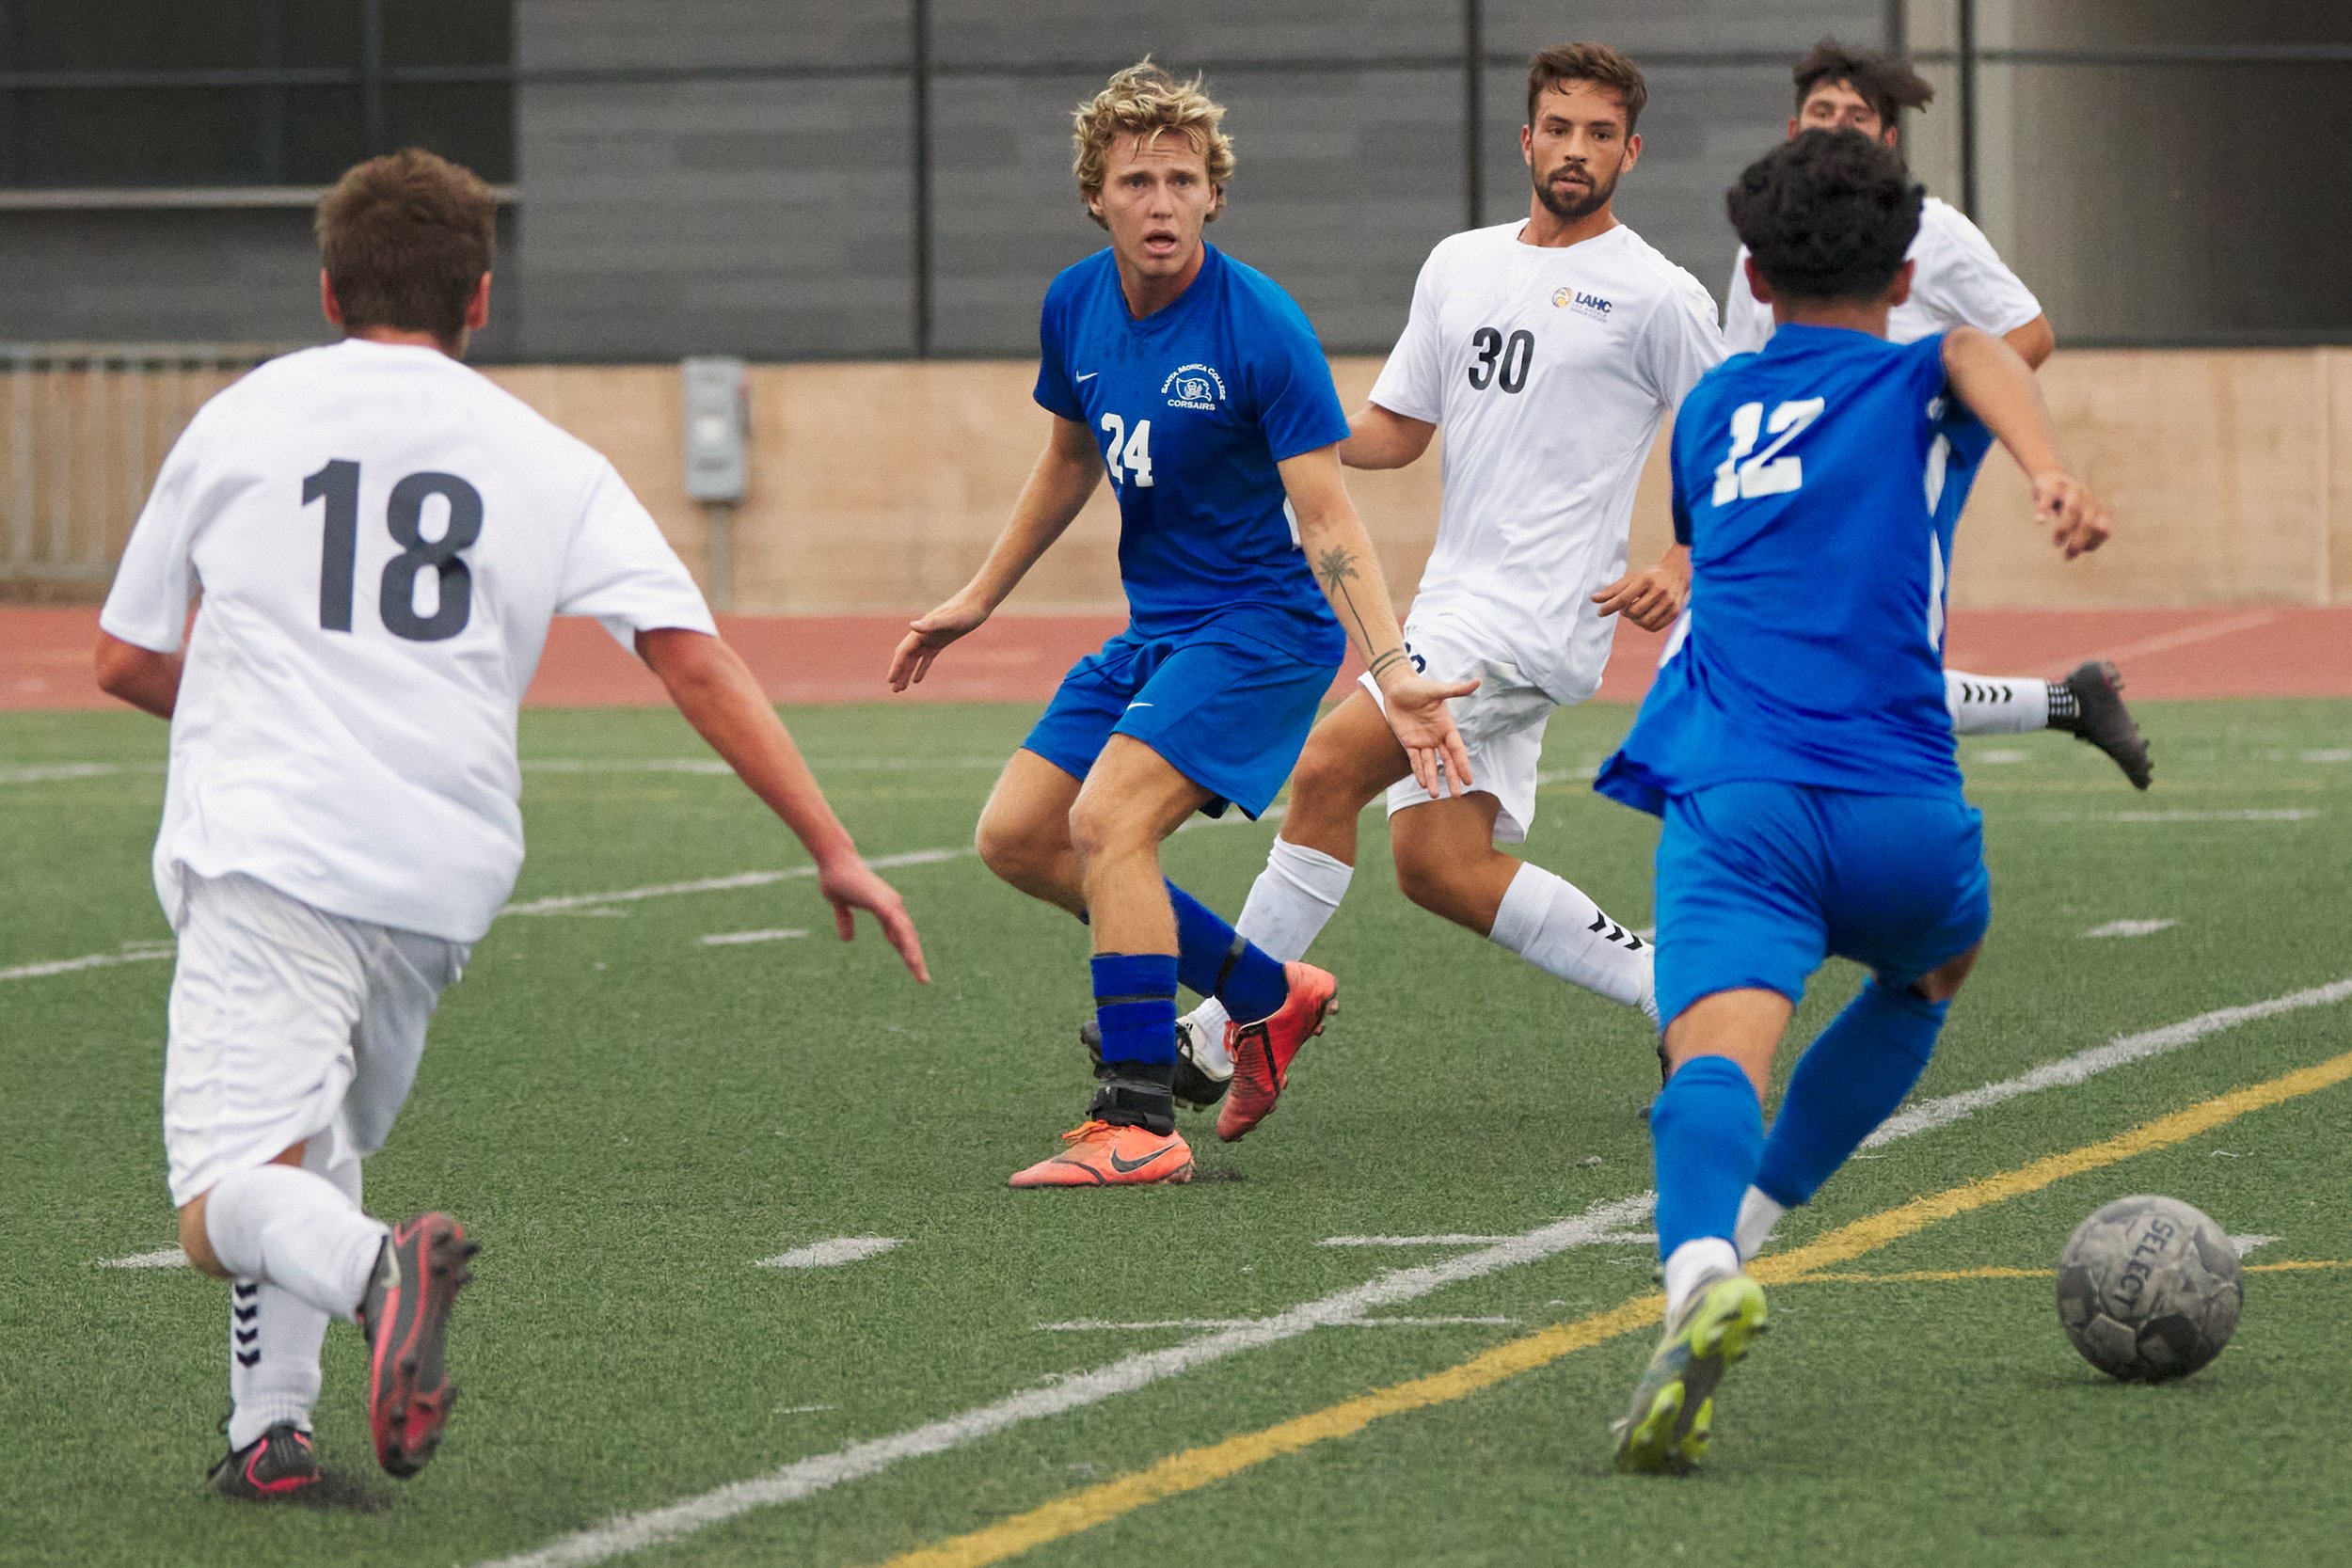  Alexander Lalor (center) and Jason Moreno (right), of the Santa Monica College Corsairs, and Isaias Hernandez (left) and [PLAYER 30], of the Los Angeles Harbor College Seahawks, during the men's soccer match on Friday, September, 9, 2022, at Corsair